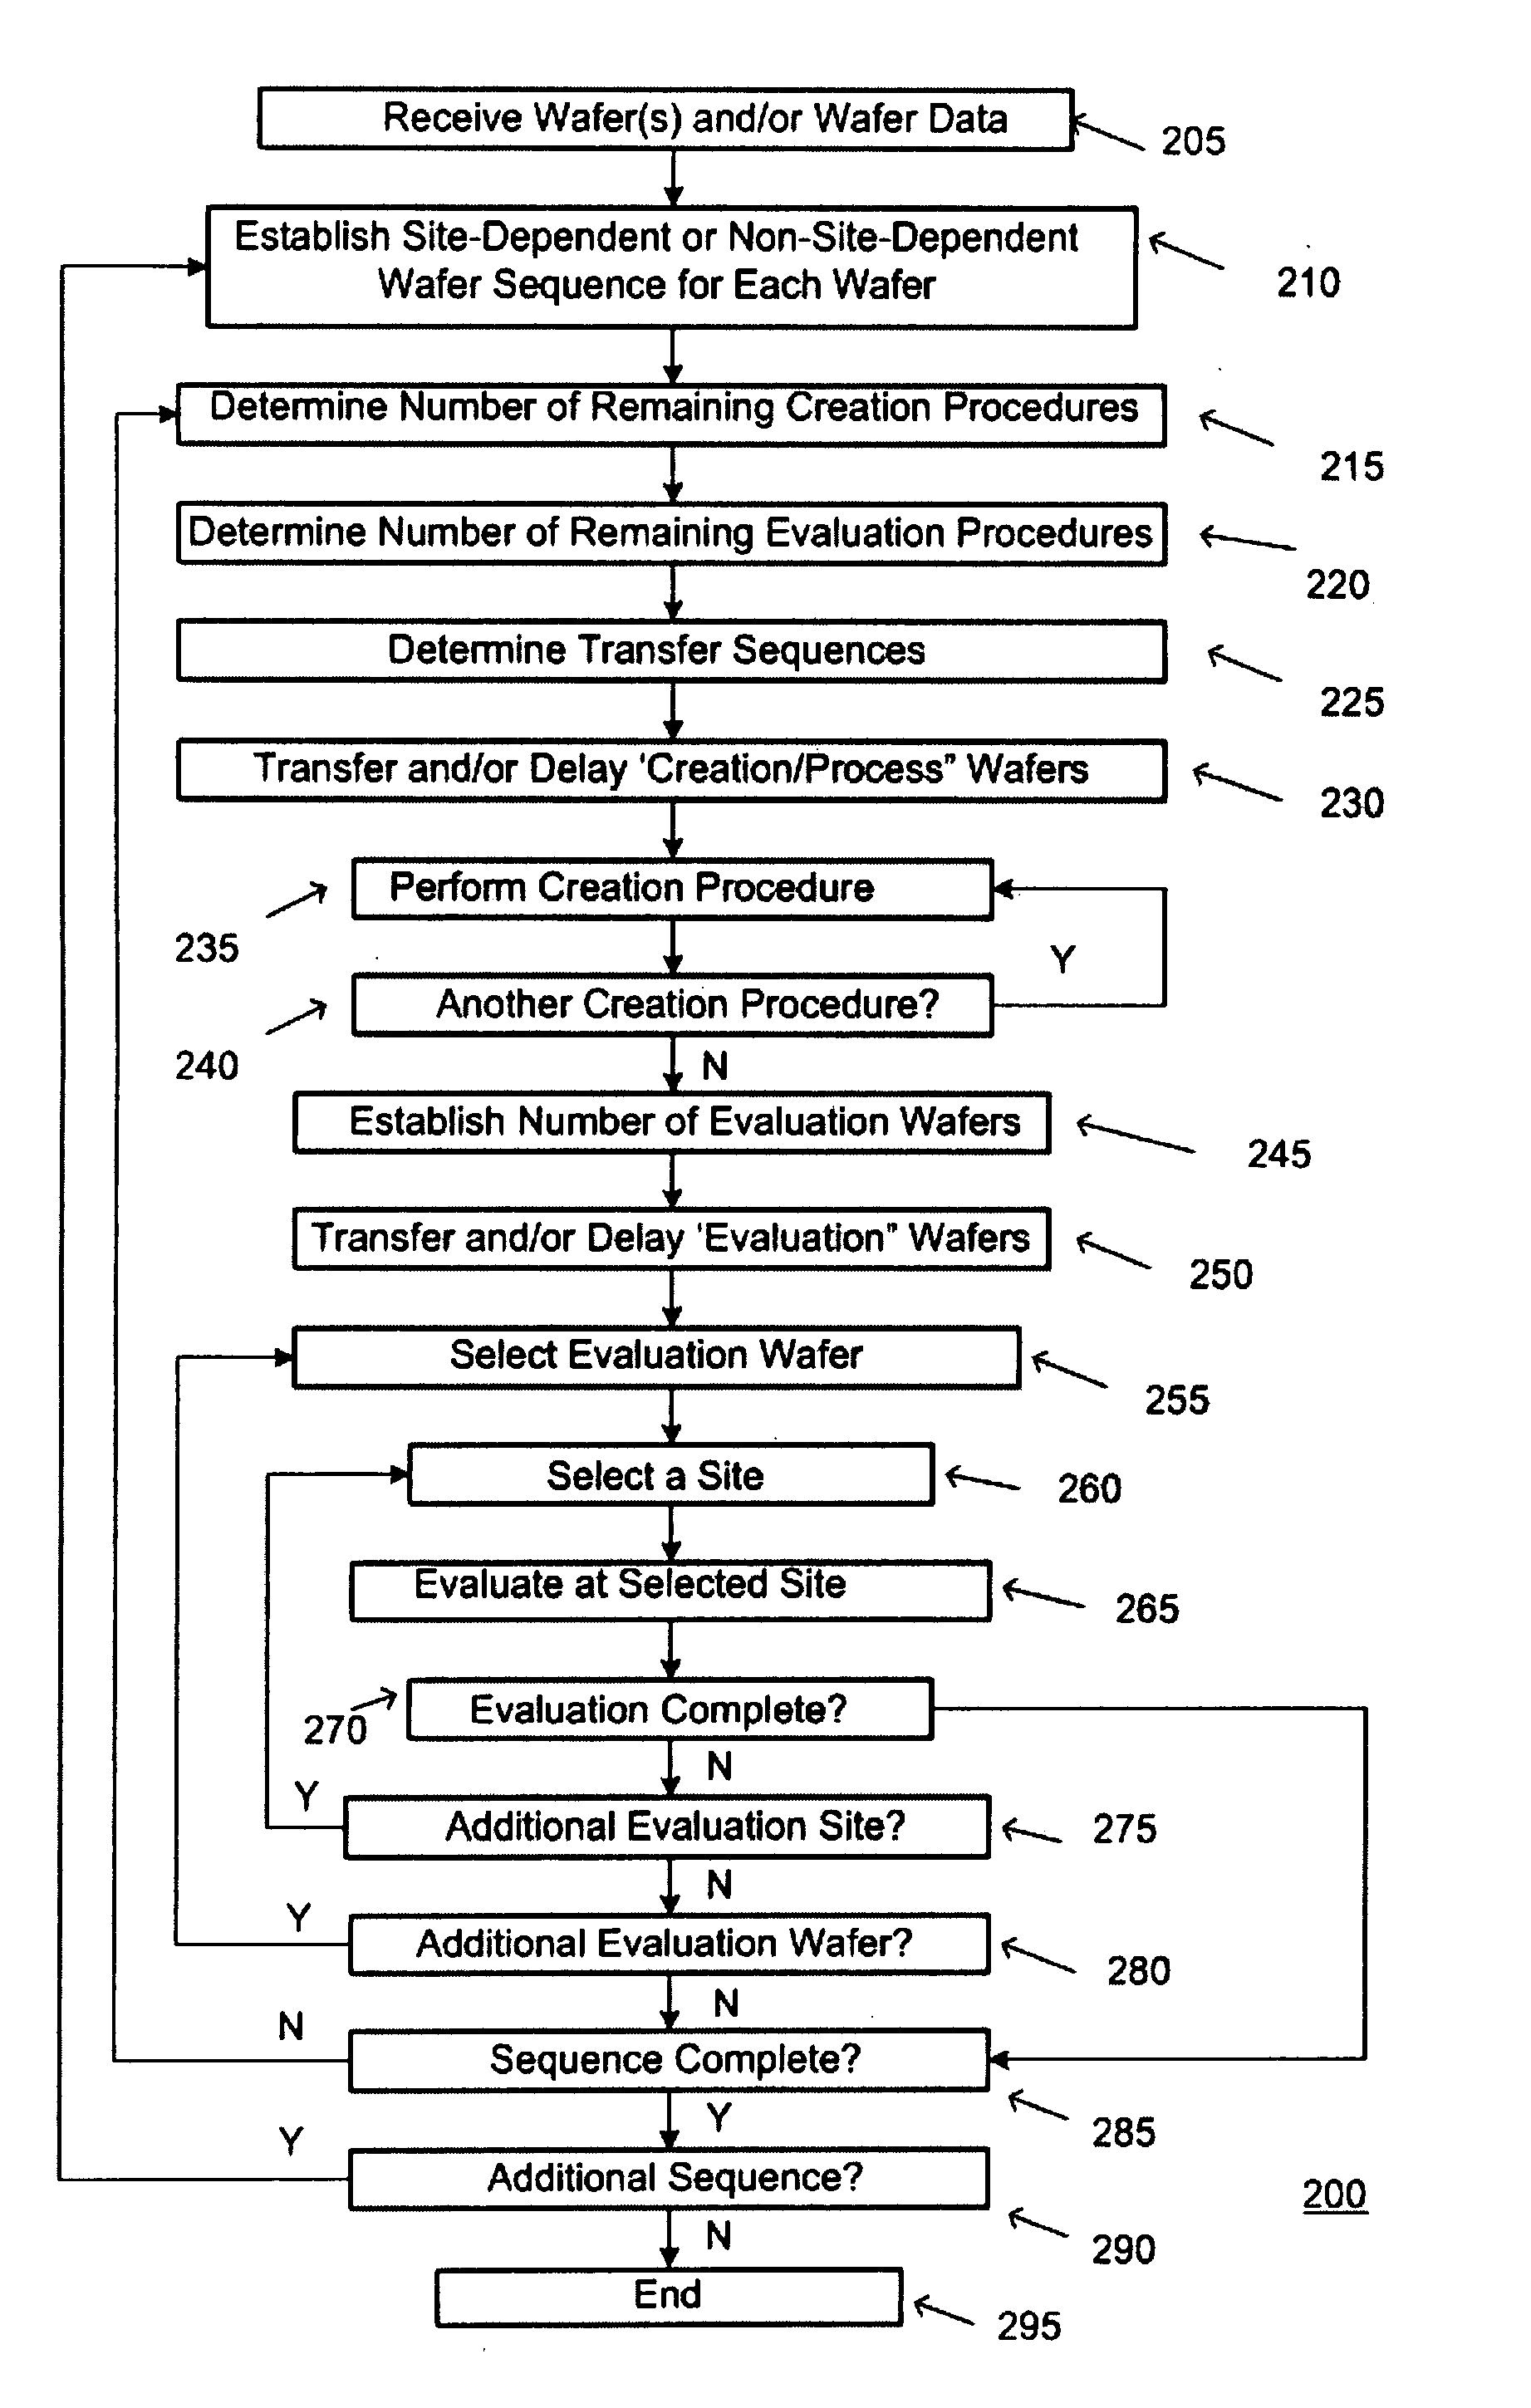 Method and apparatus for creating a site-dependent evaluation library